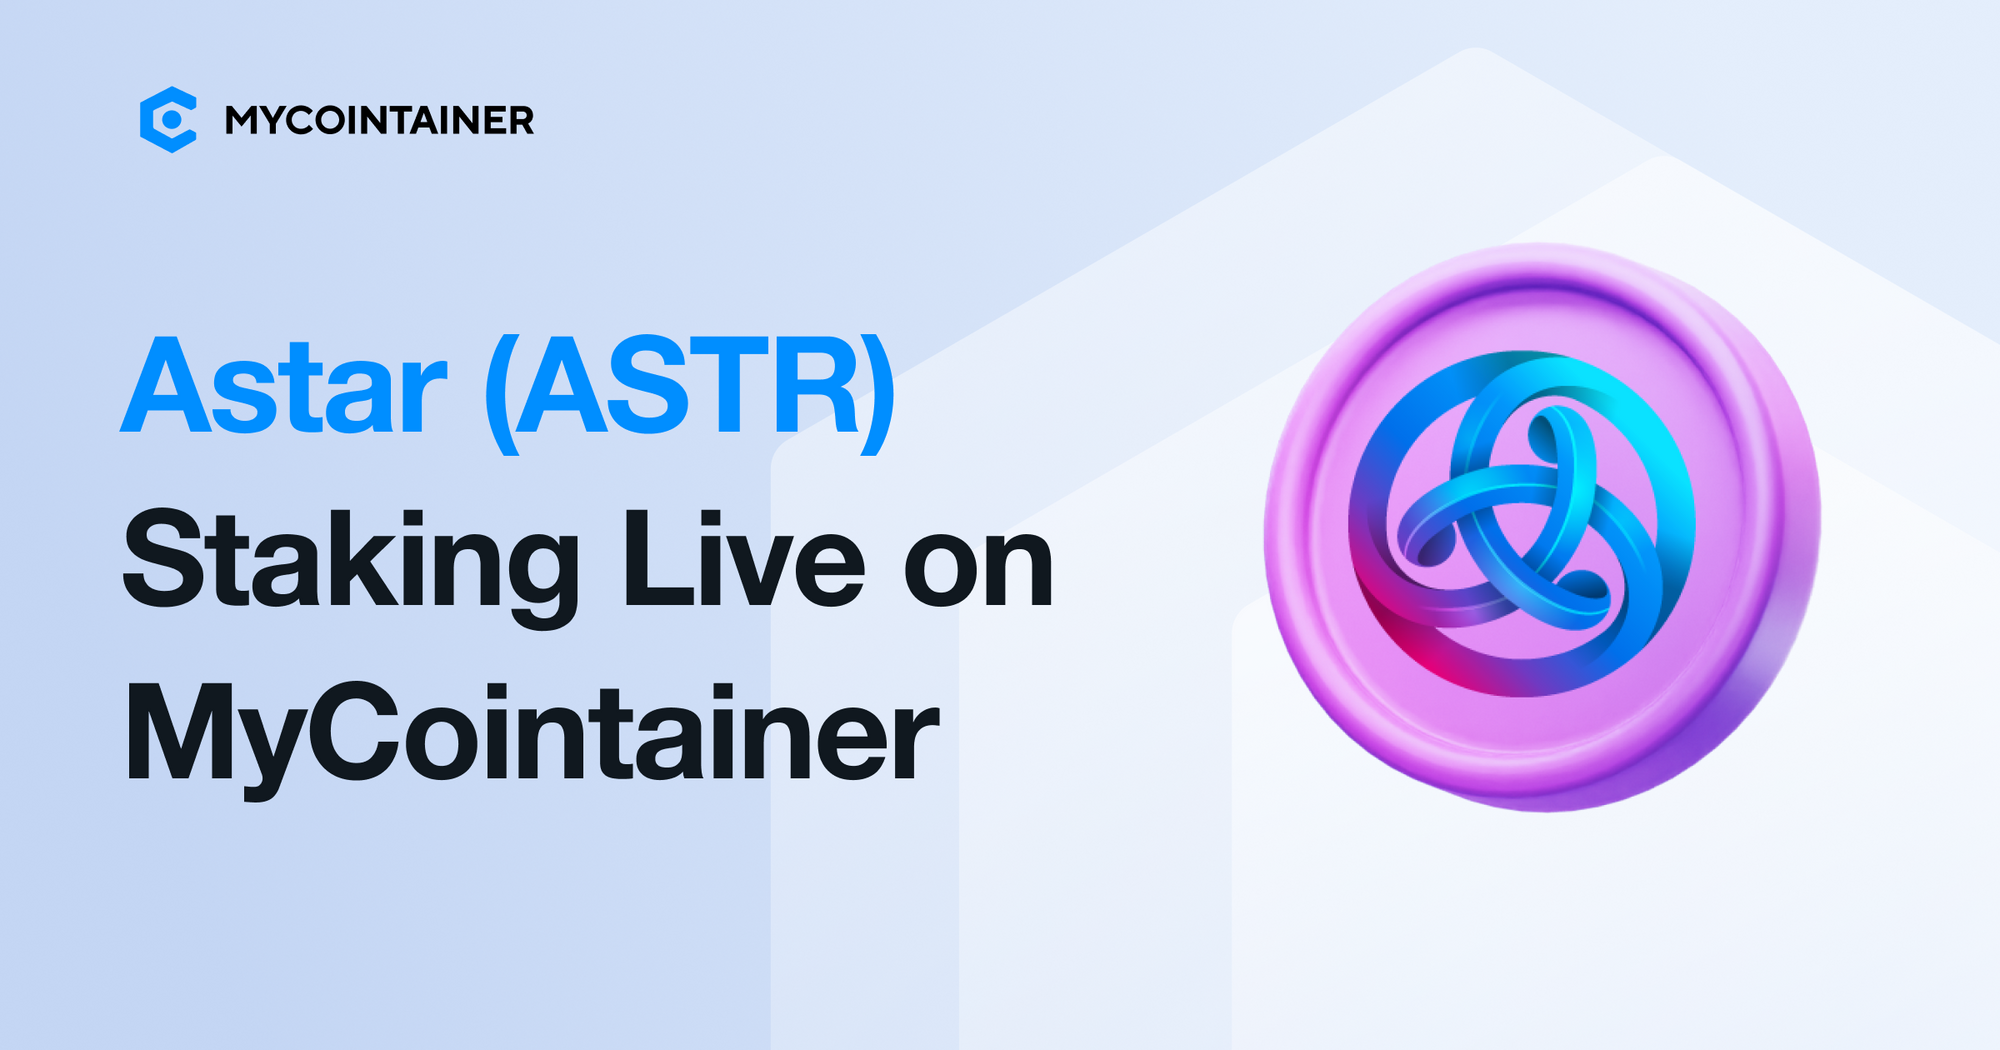 Astar Staking Live on MyCointainer